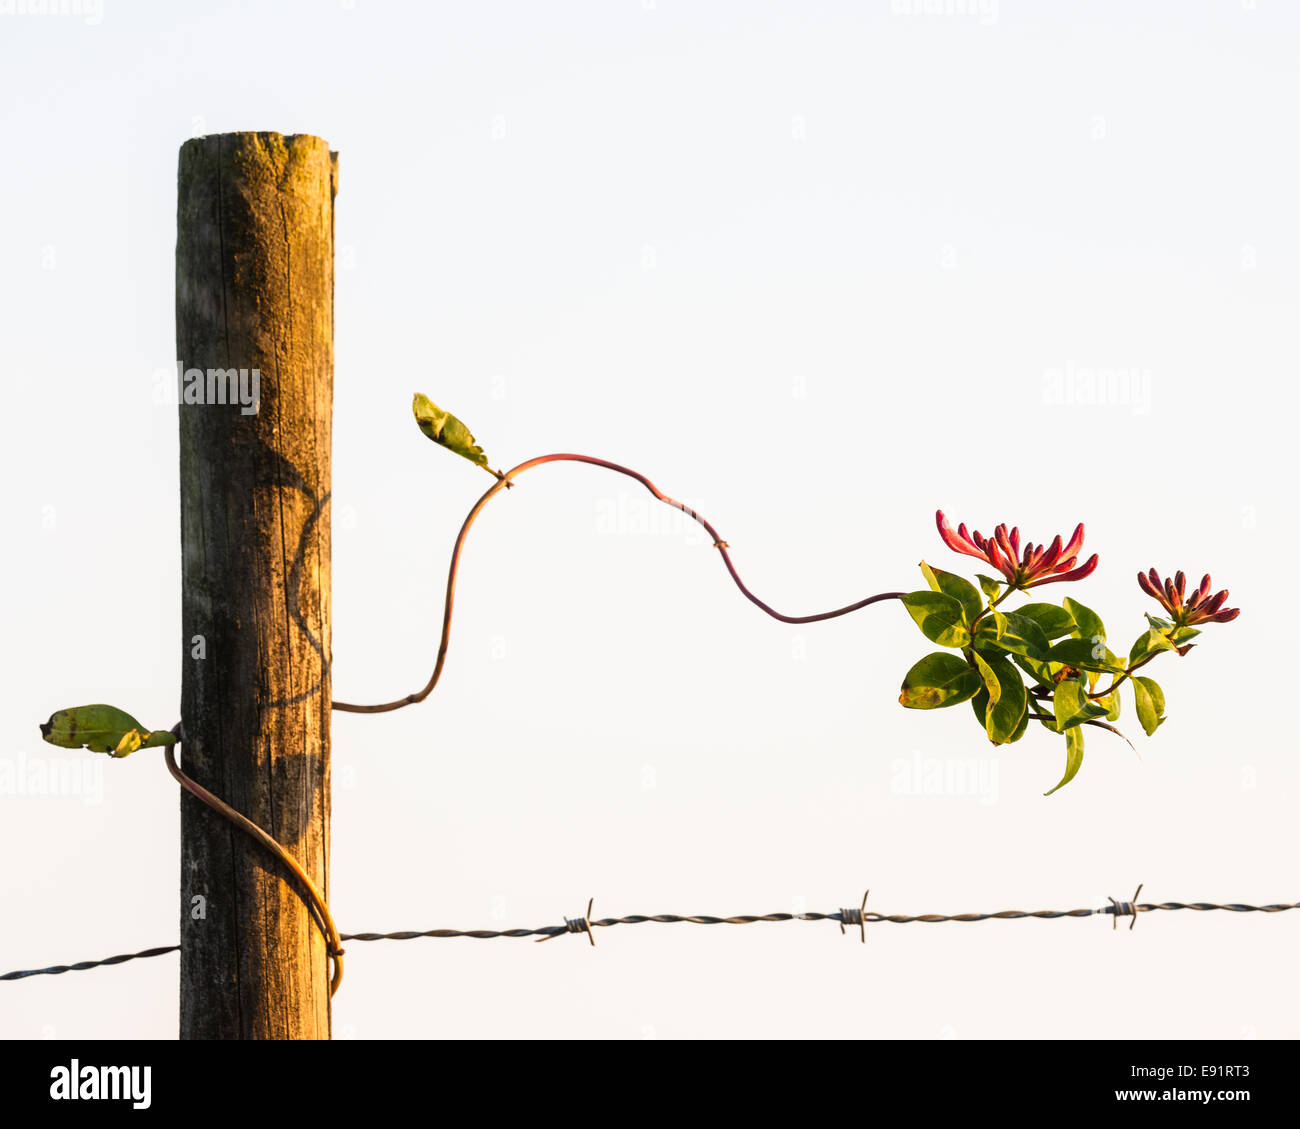 Vine with blossoming red flowers growing on a barbed wire fence Stock Photo